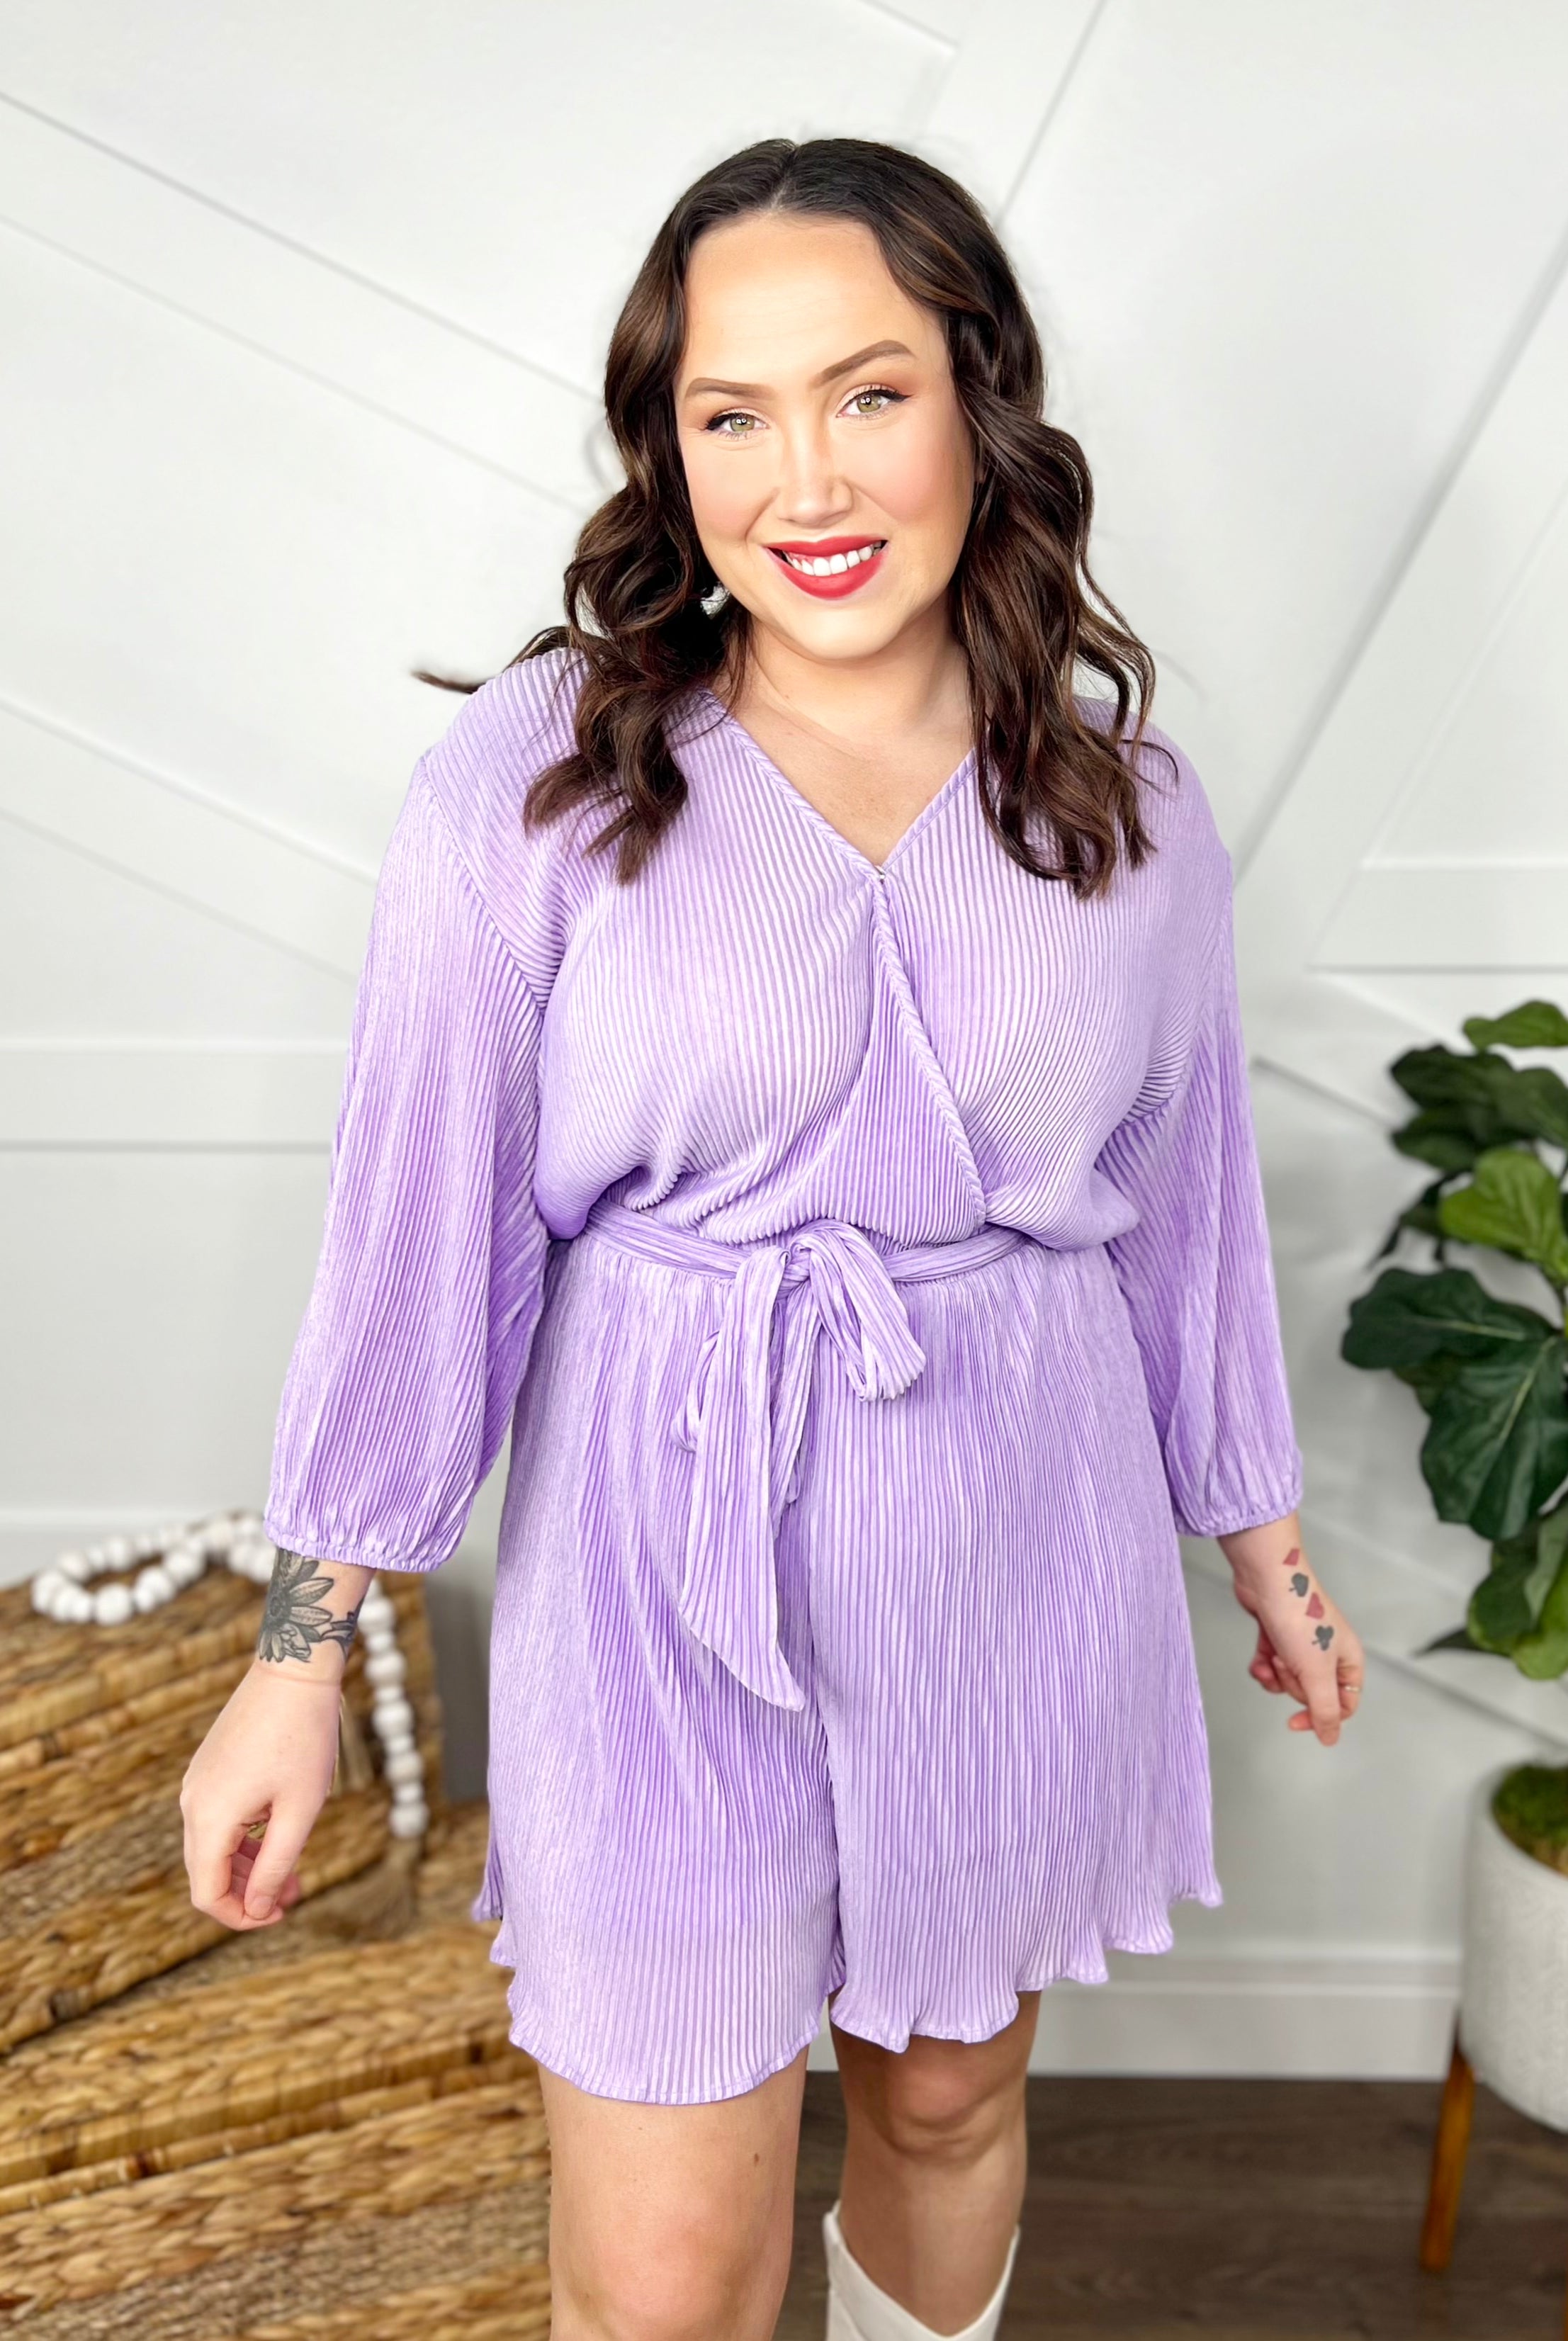 Restock: Fearless Romper-230 Dresses/Jumpsuits/Rompers-White Birch-Heathered Boho Boutique, Women's Fashion and Accessories in Palmetto, FL